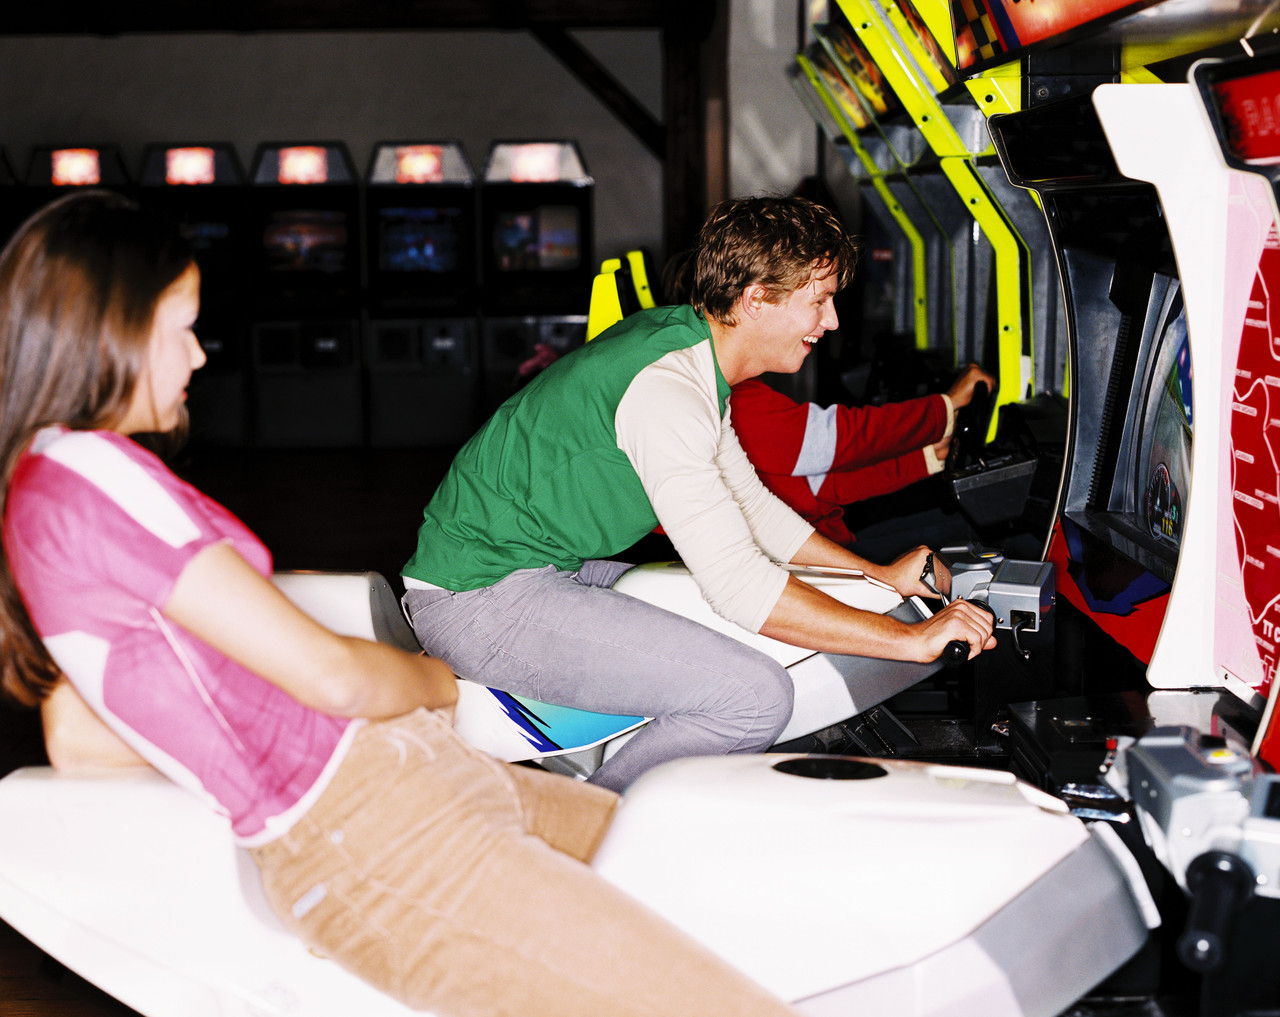 Teenagers Playing on Video Game Simulations